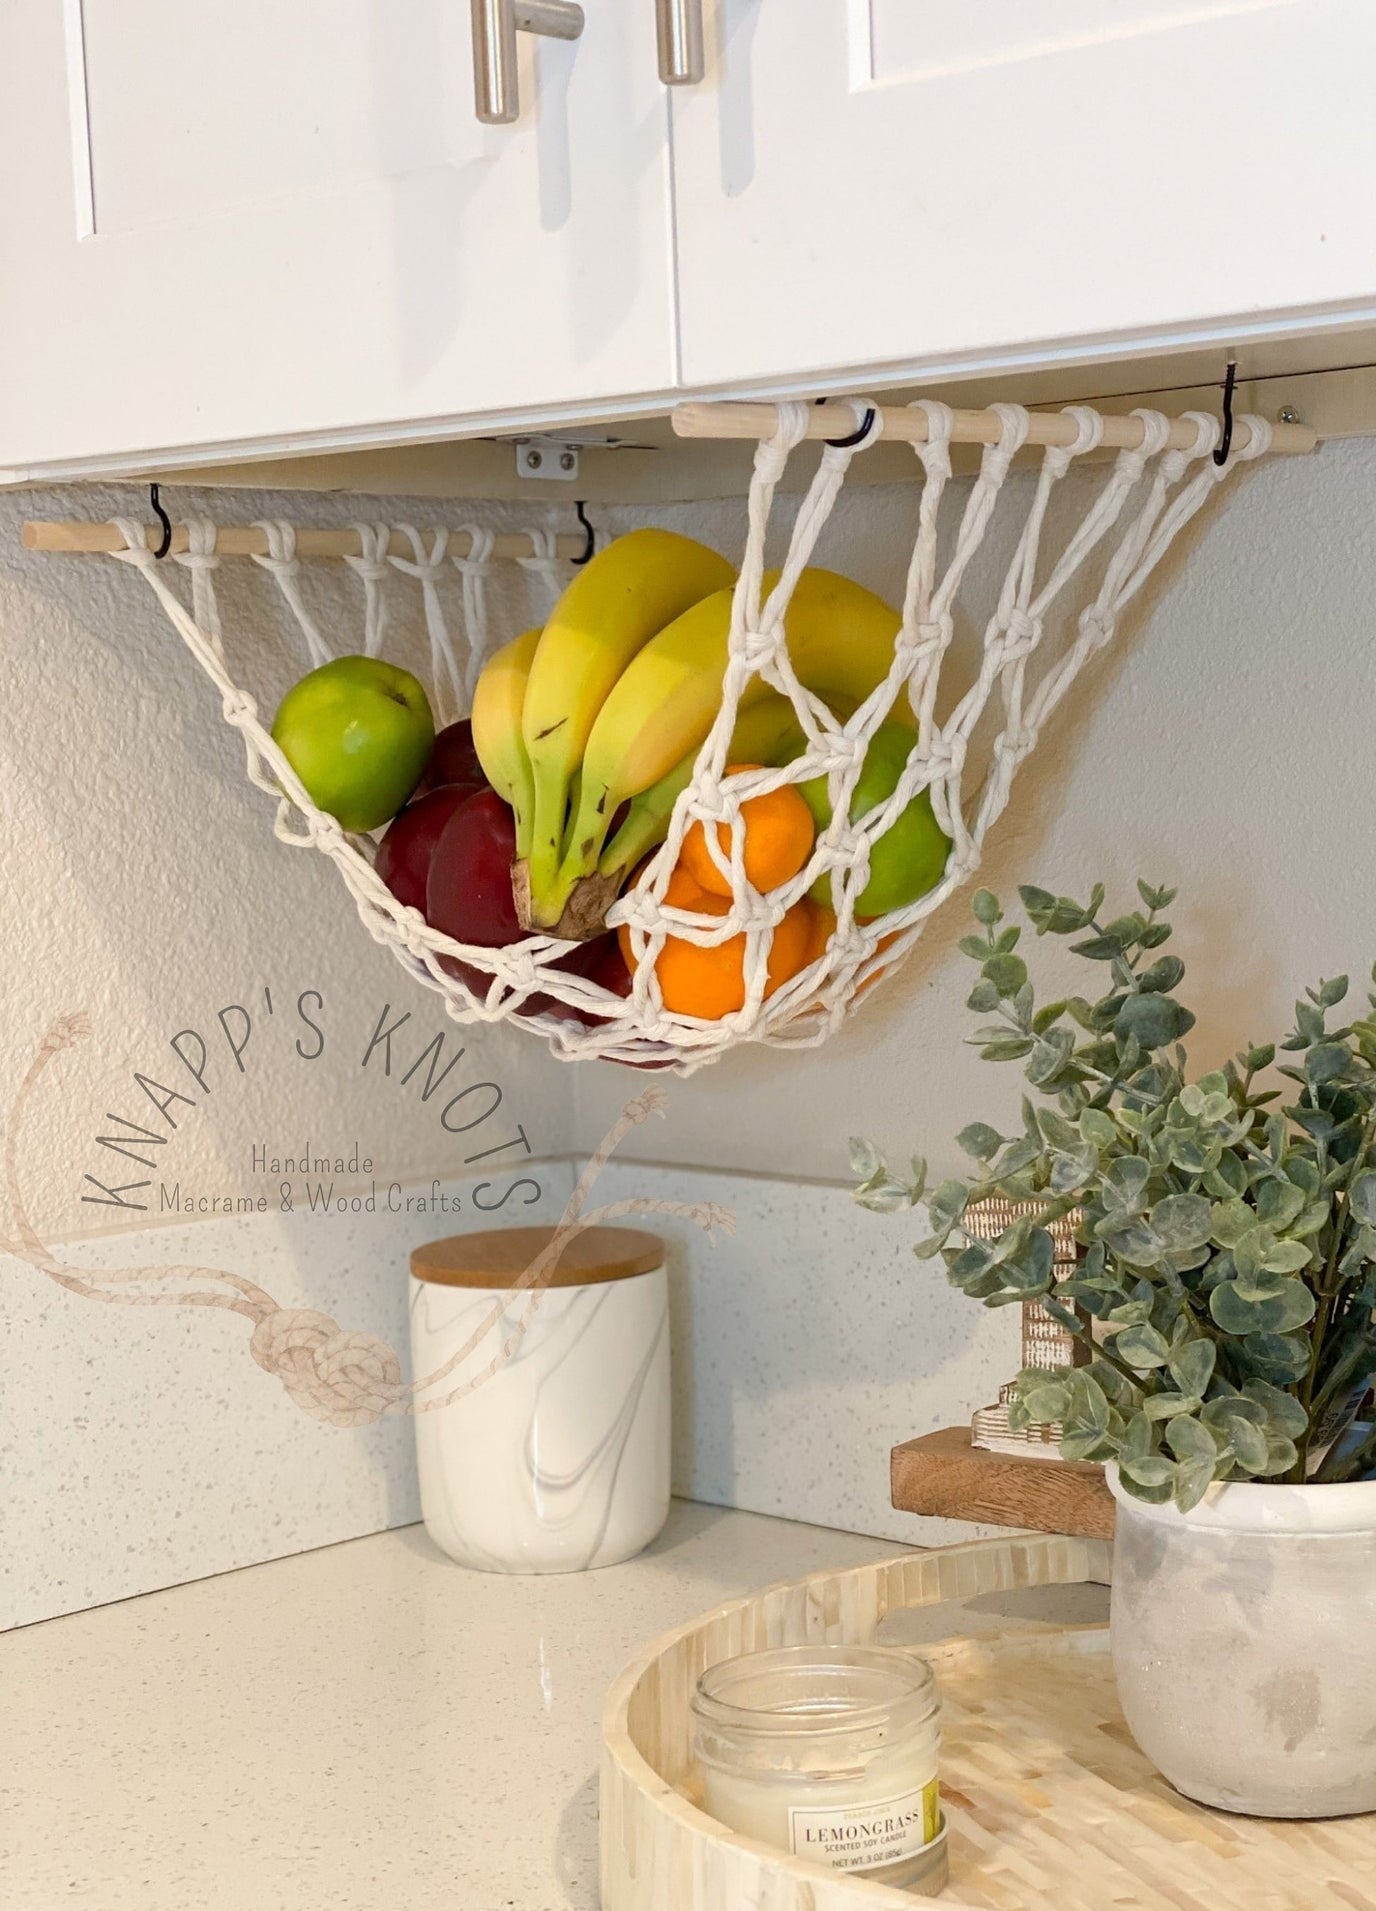 The macrame net hung below a cabinet with wood dowels and hooks